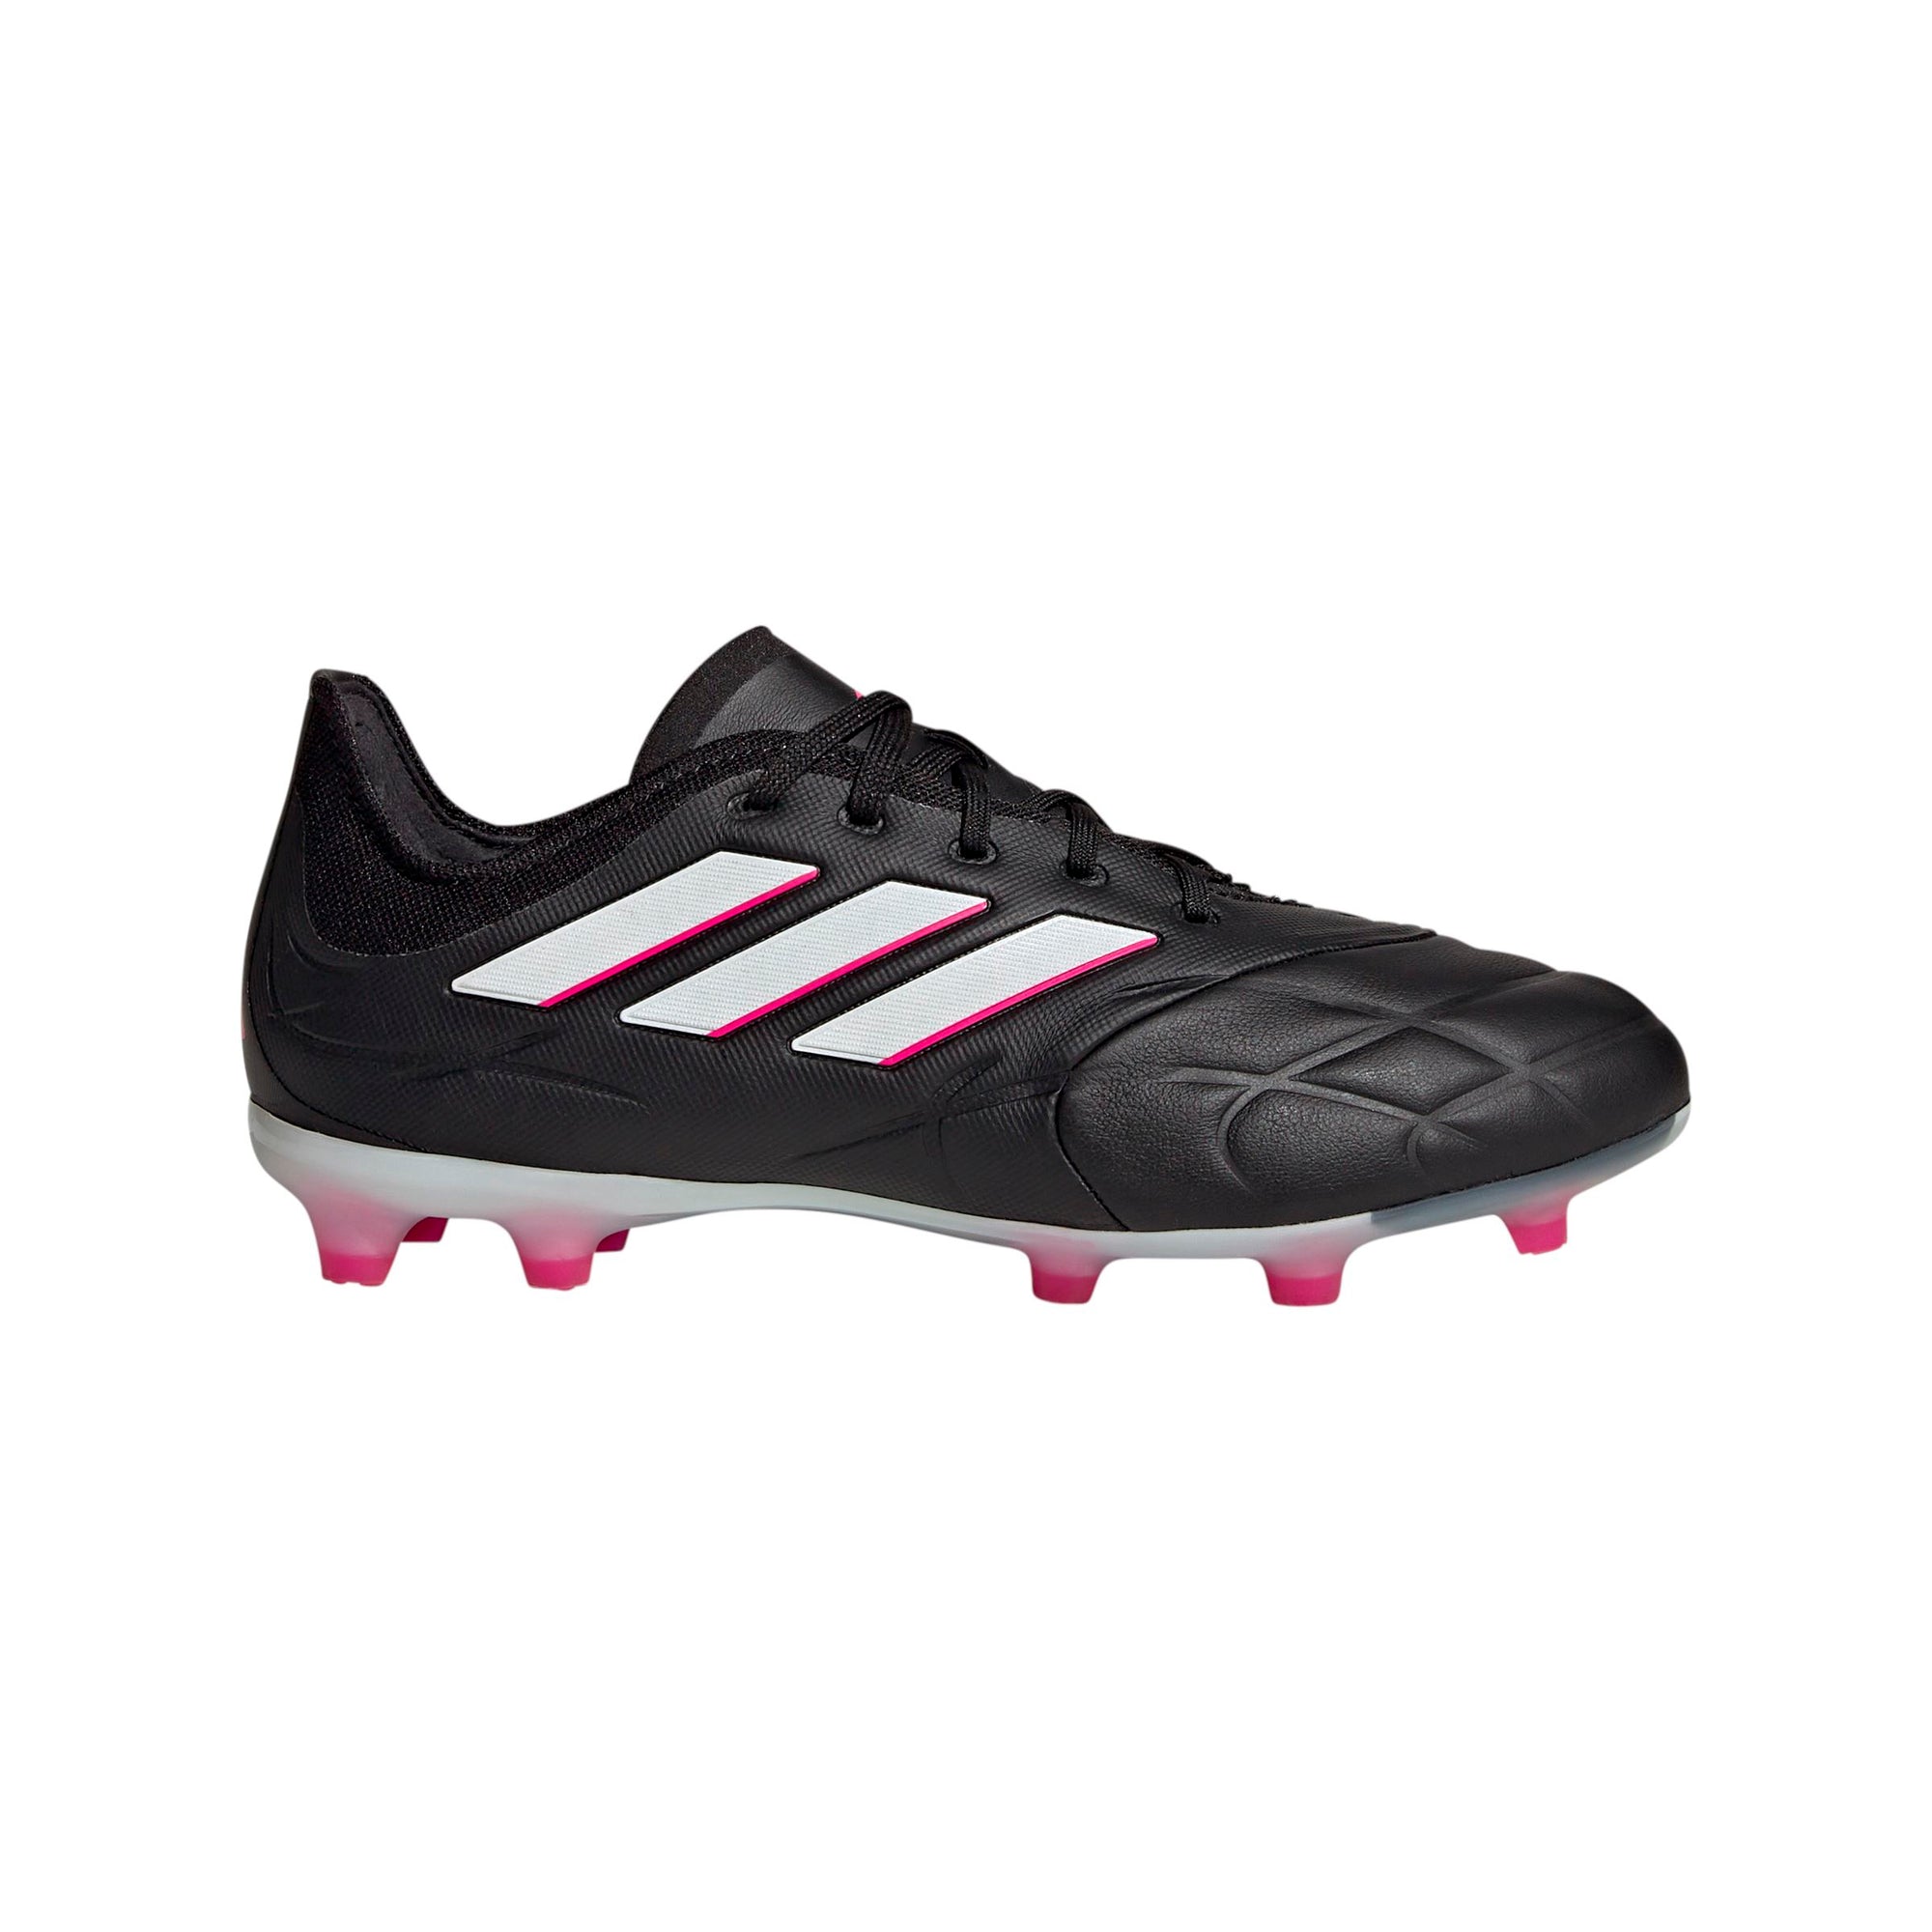 adidas Youth Copa Pure.1 Firm Ground Soccer Cleats | HQ8887 Cleats Adidas 1 Core Black / Zero Met. / Team Shock Pink 2 